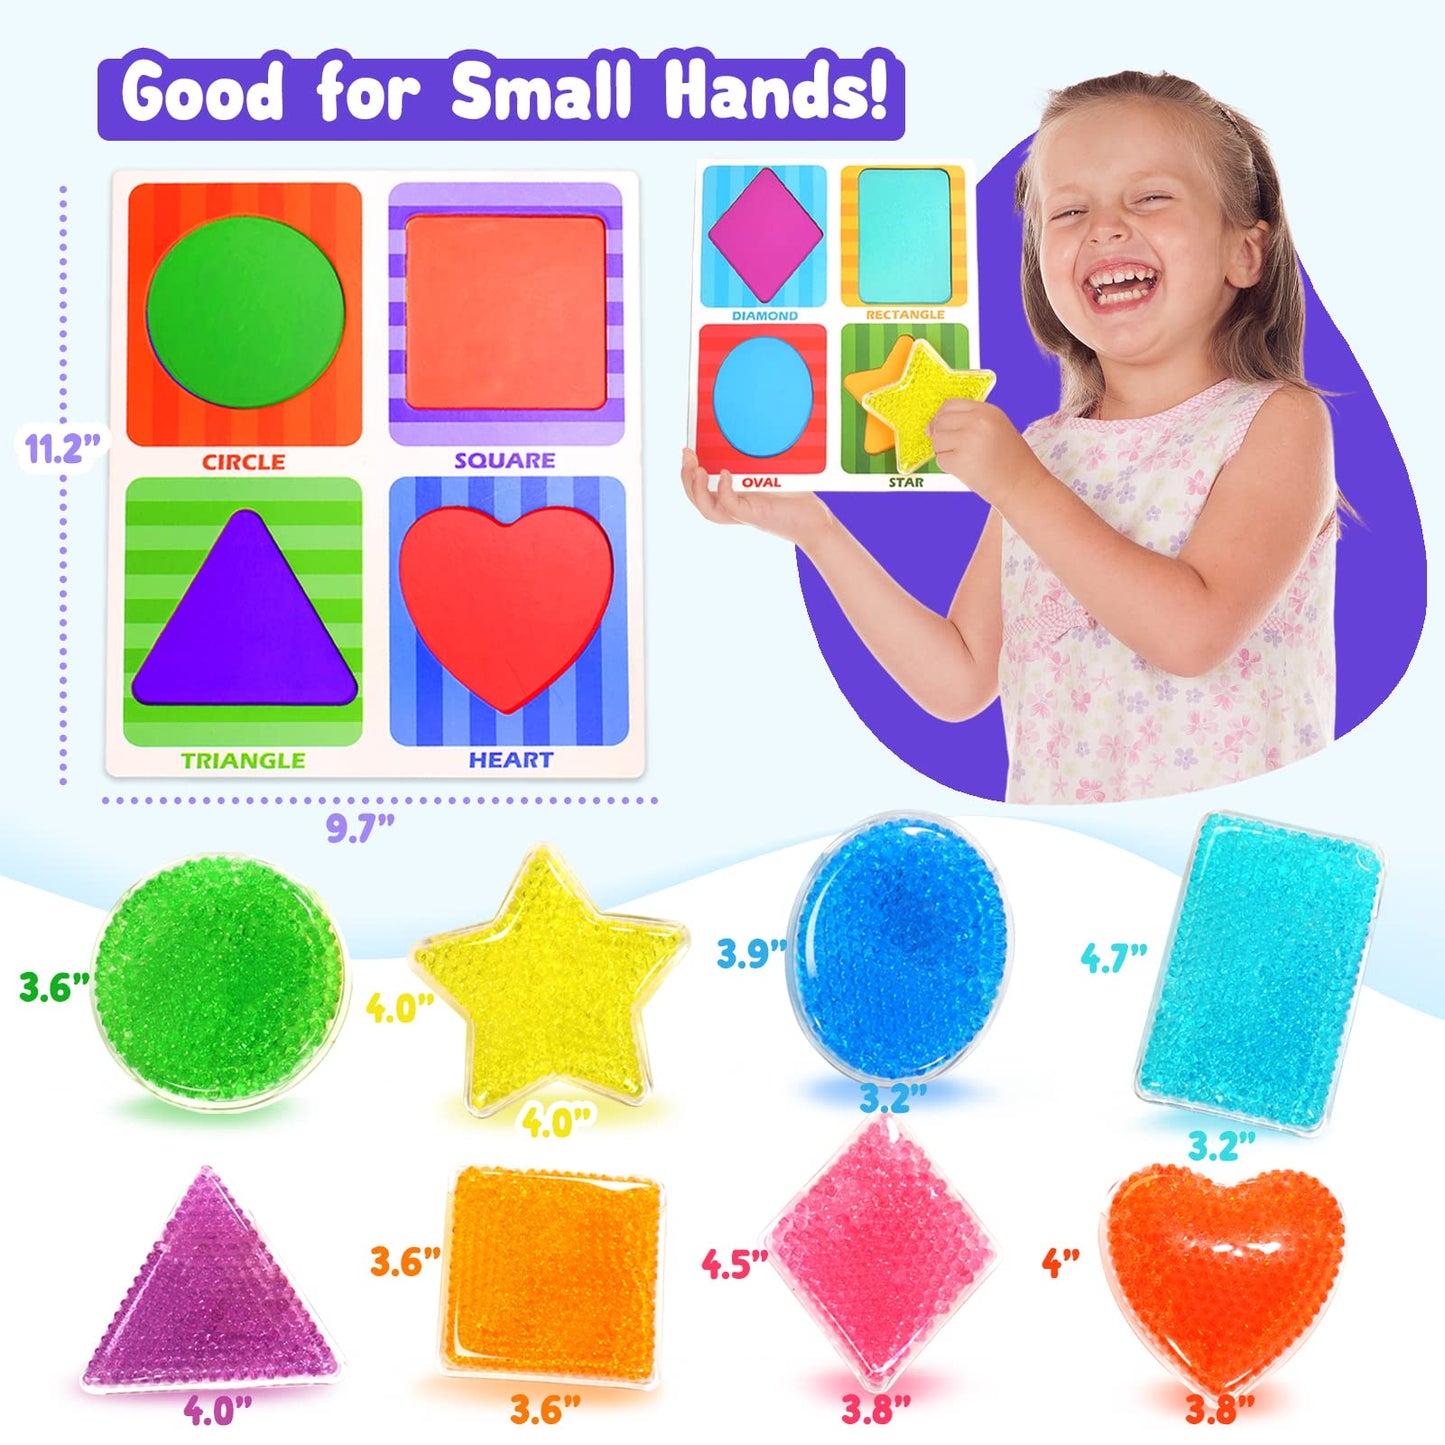 Toddlers Montessori Toy For Boys Girls 3 4 Years Old, Education Learning Colors & Shapes Sorting Toys, Water Beads Sensory Toys for Autistic Children, Preschool Fine Motor Skills Game - Kids Gifts